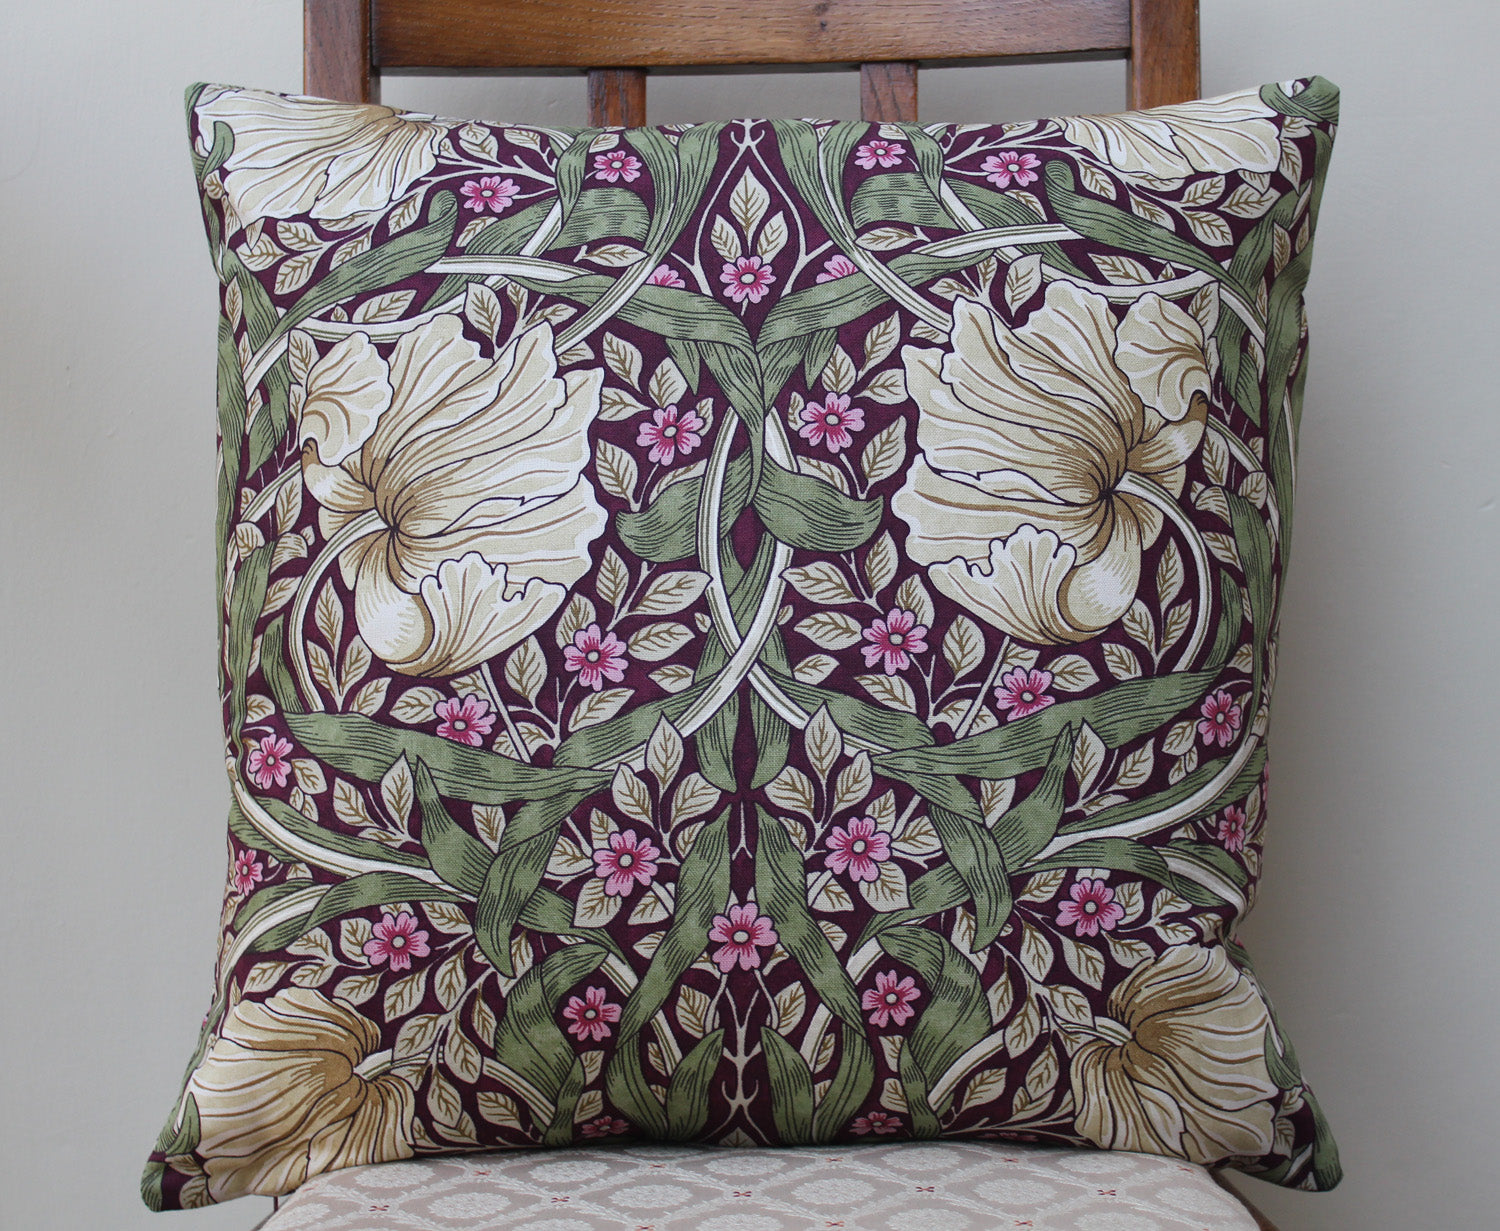 <p>Cotton filled cushion in William Morris Pimpernel Aubergine print made from Morris & Co. Sanderson fabric.</p>